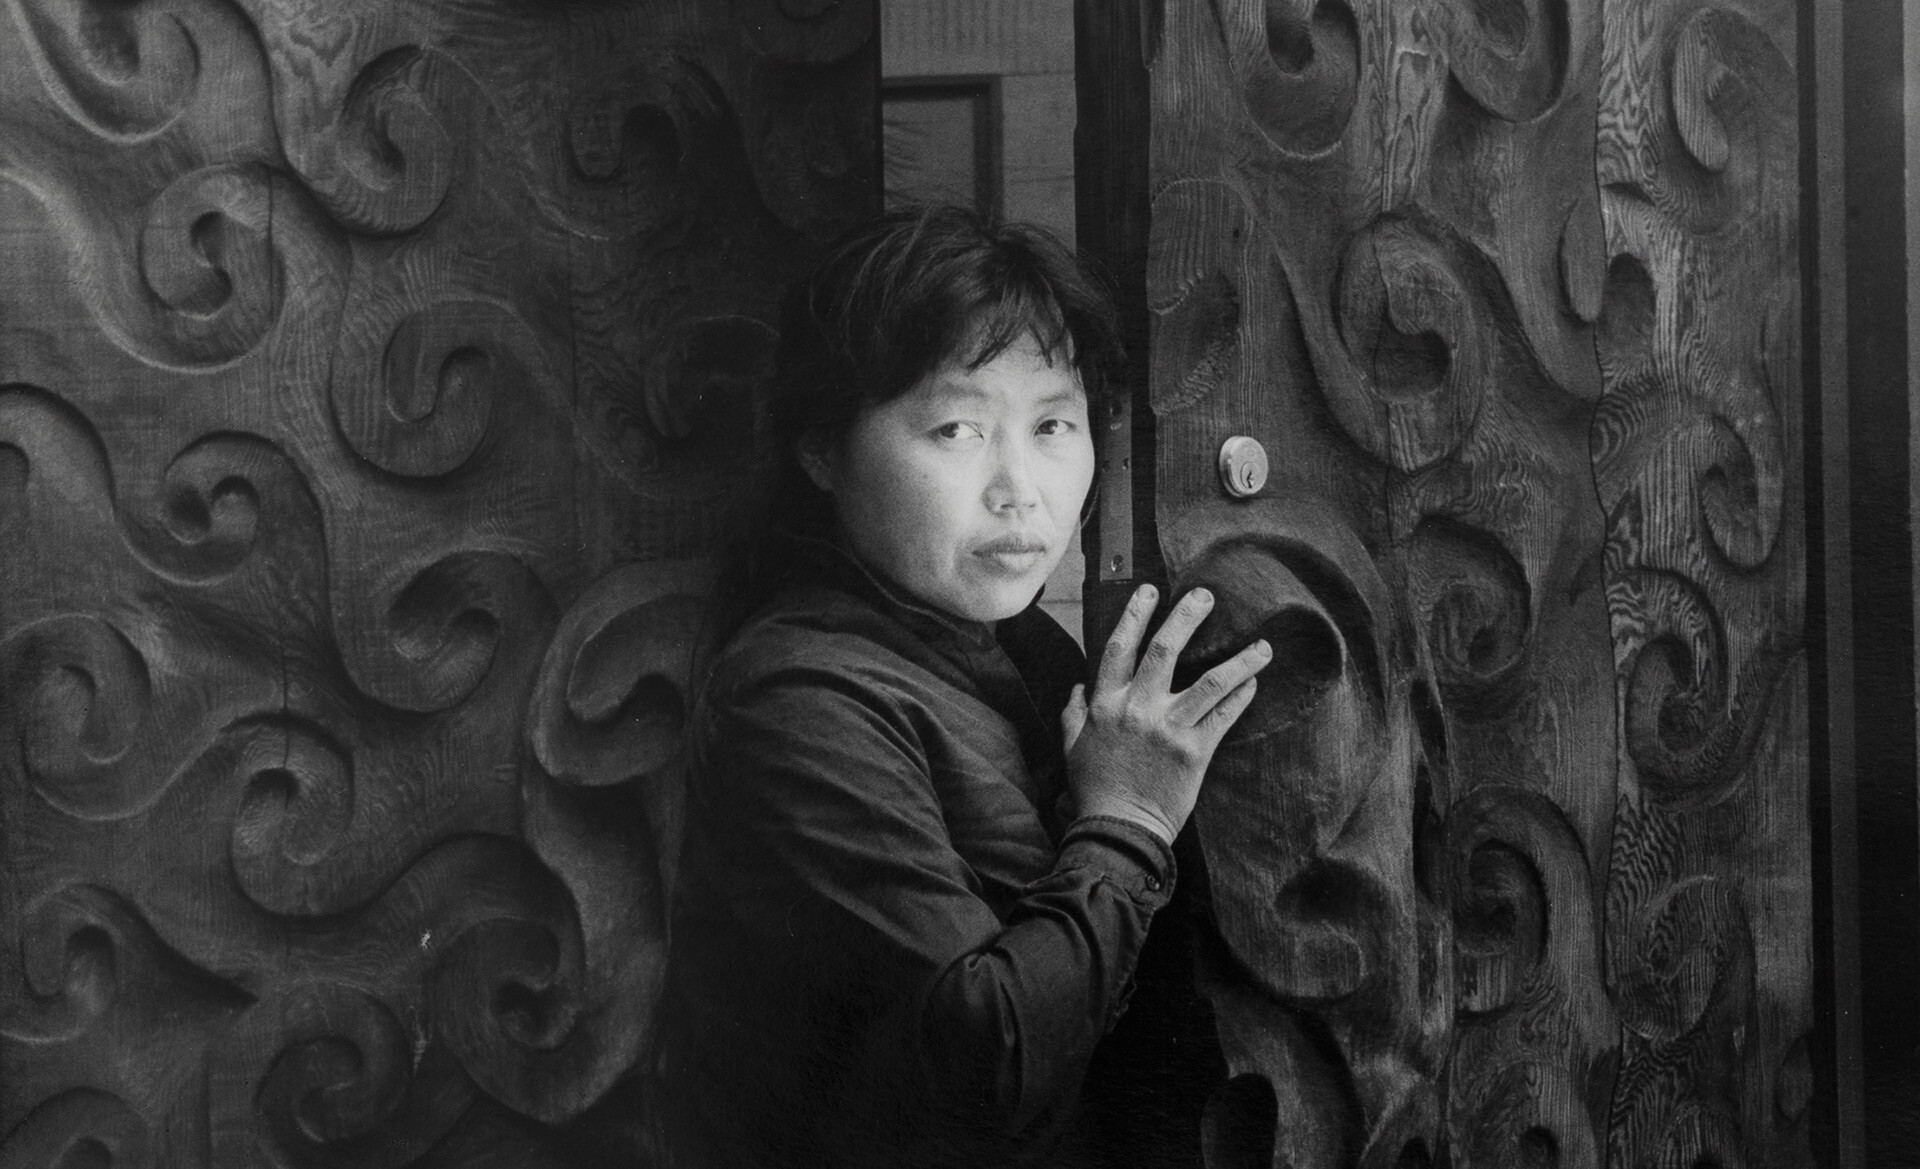 A photo by Imogen Cunningham of Ruth Asawa standing at her door, dated 1963. 